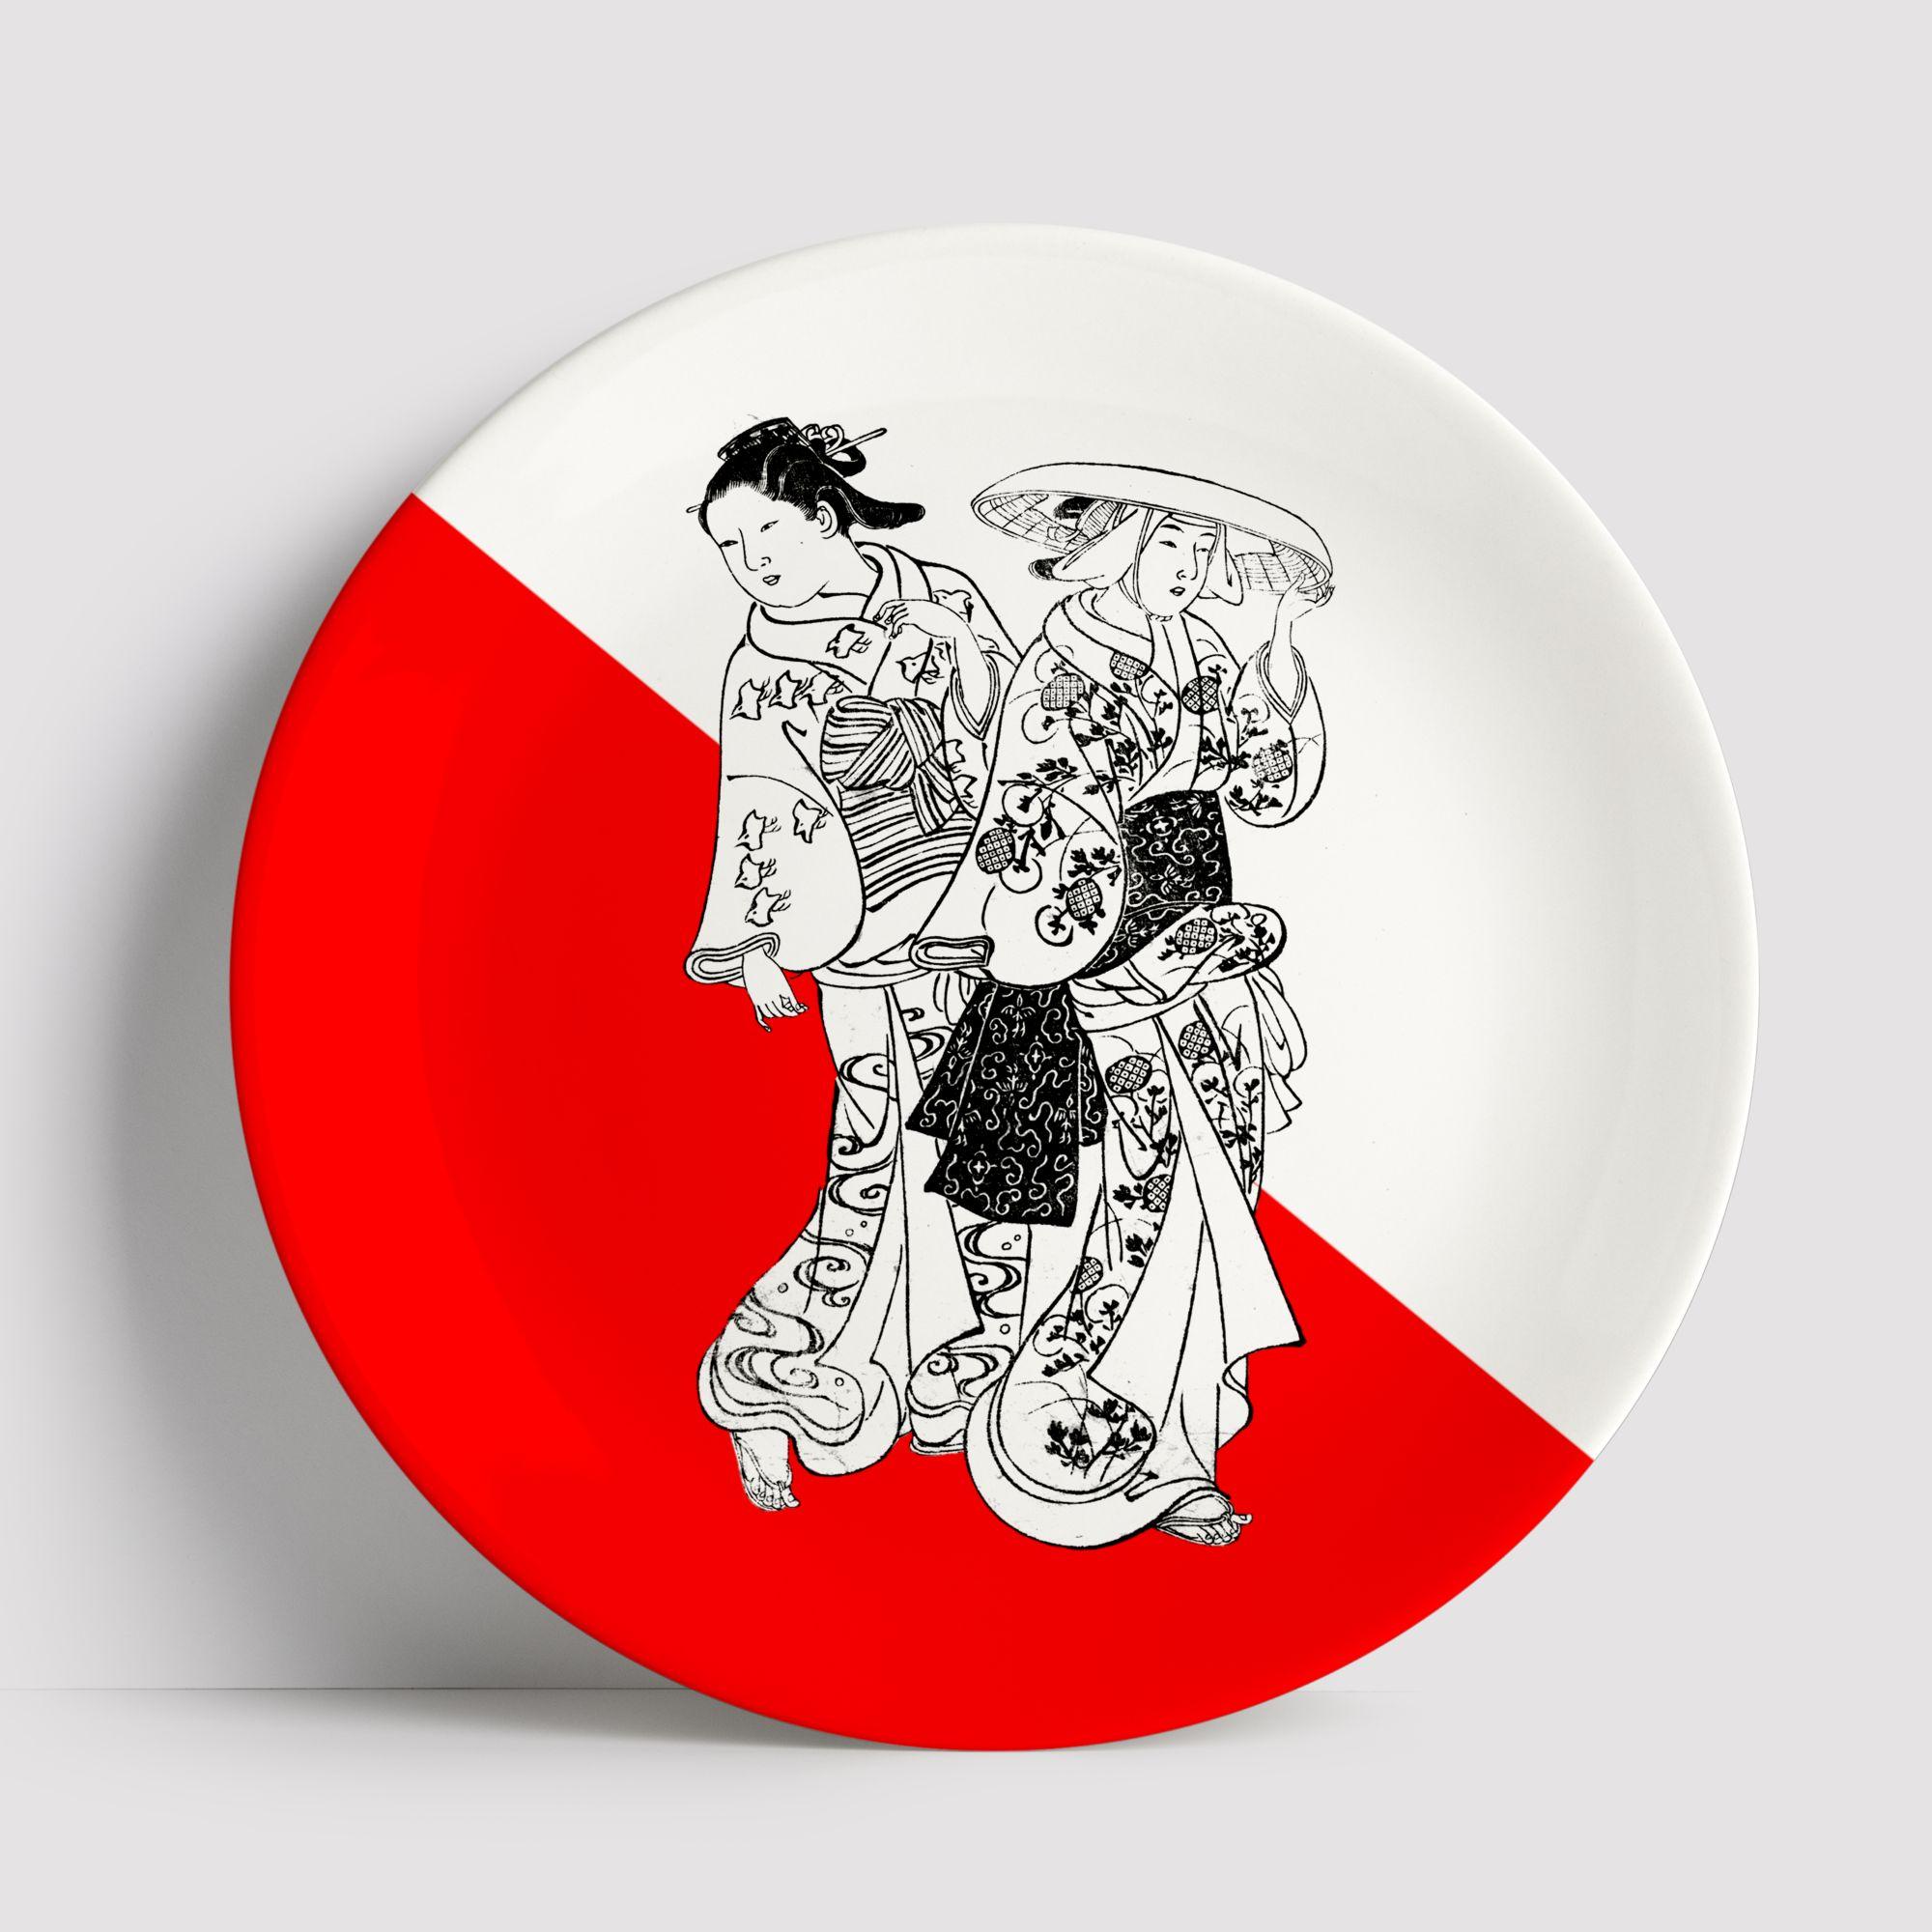 Beautiful Japanese Women porcelain dinner plate by Plus Lab will make an elegant statement with sophisticated Art de la table for every occasion.
Made in Italy.

Upon request available in a set of three or six plates.